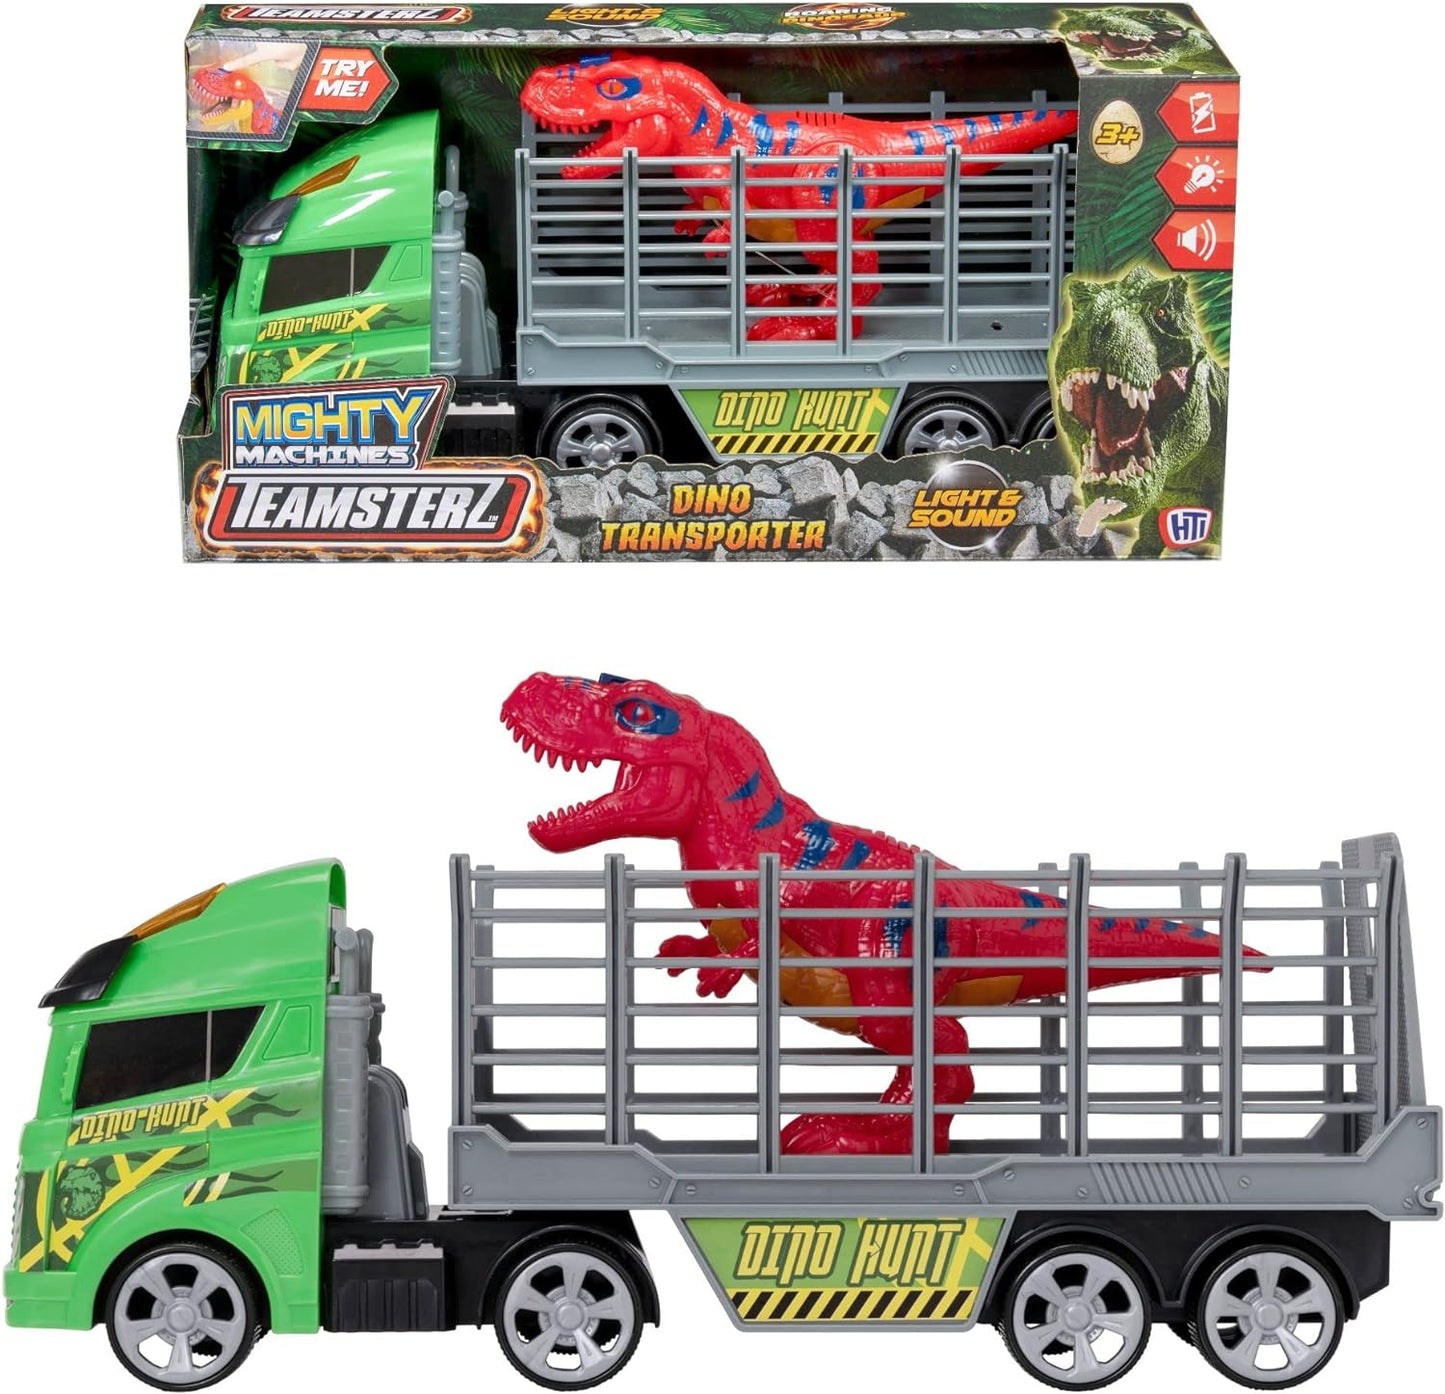 Teamsterz Small Light & Sound Dino Rescue Truck Transporter Toy